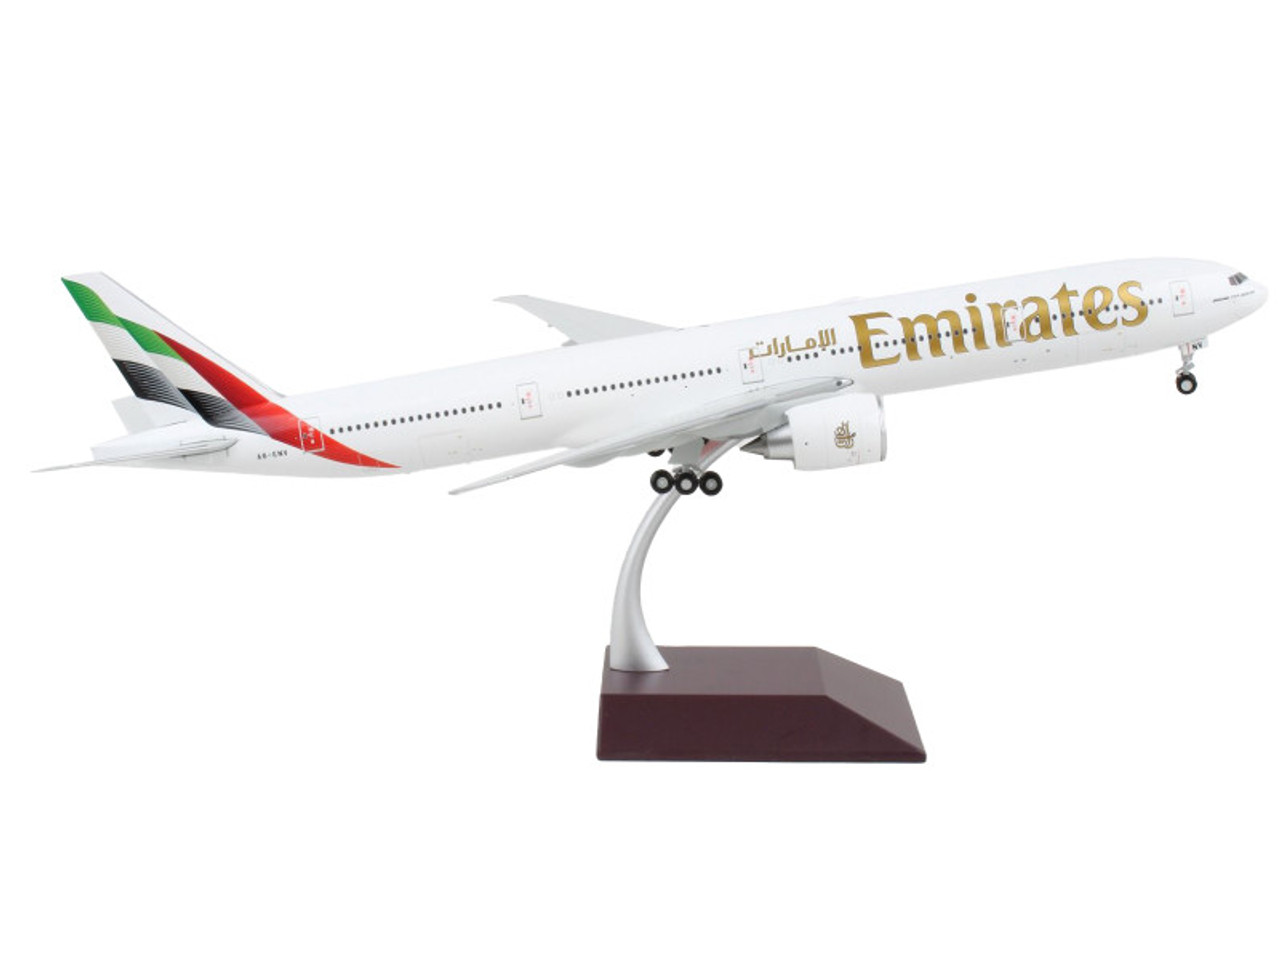 Boeing 777-300ER Commercial Aircraft "Emirates Airlines - 2023 Livery" White with Striped Tail "Gemini 200" Series 1/200 Diecast Model Airplane by GeminiJets